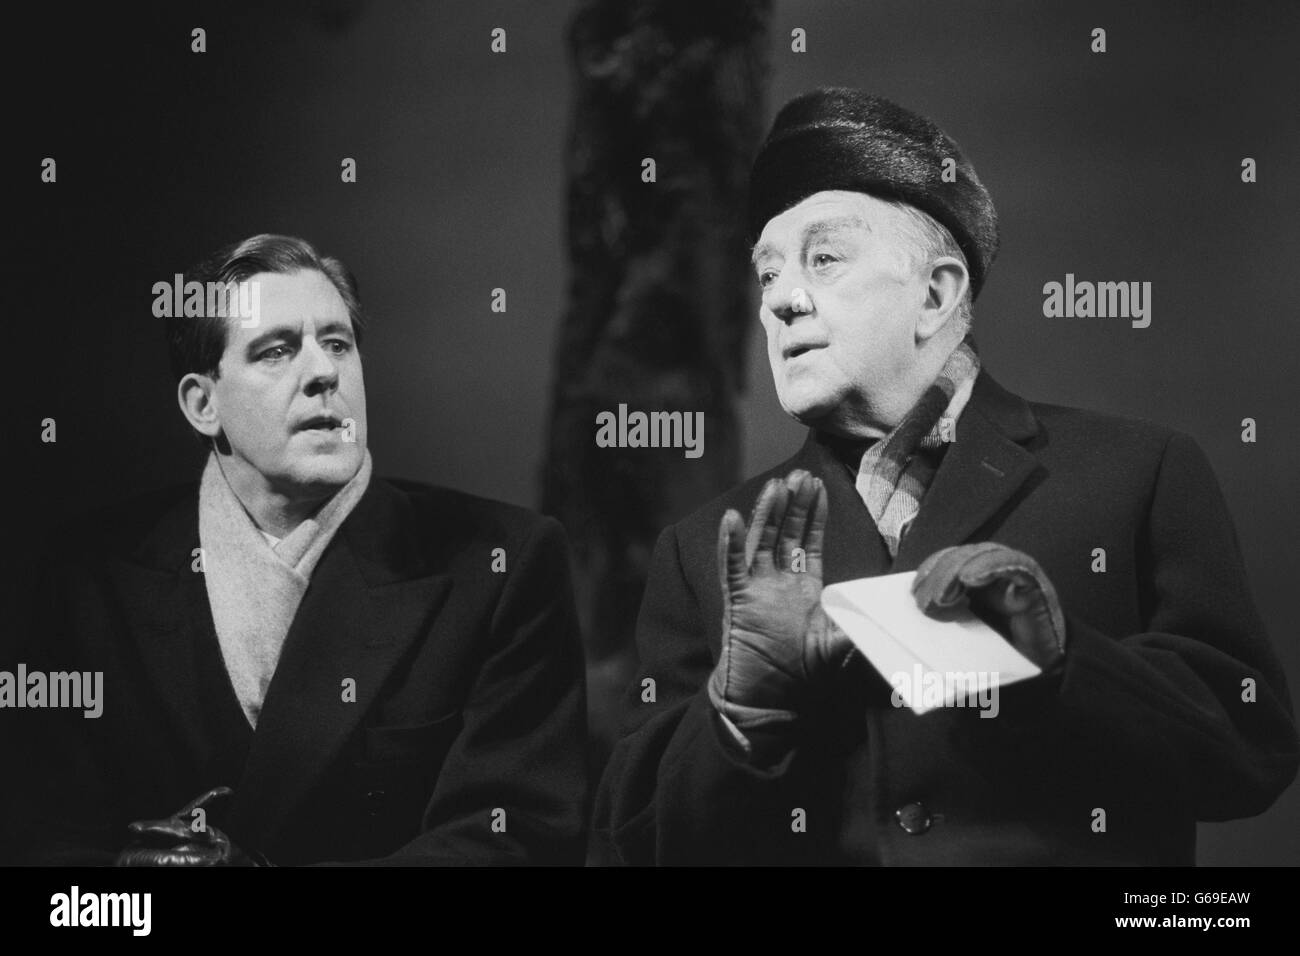 Sir Alec Guinness (right) plays a Soviet diplomat opposite Edward Hermann in a scene from Lee Blessing's A Walk in the Woods at the Comedy Theatre in London. Stock Photo